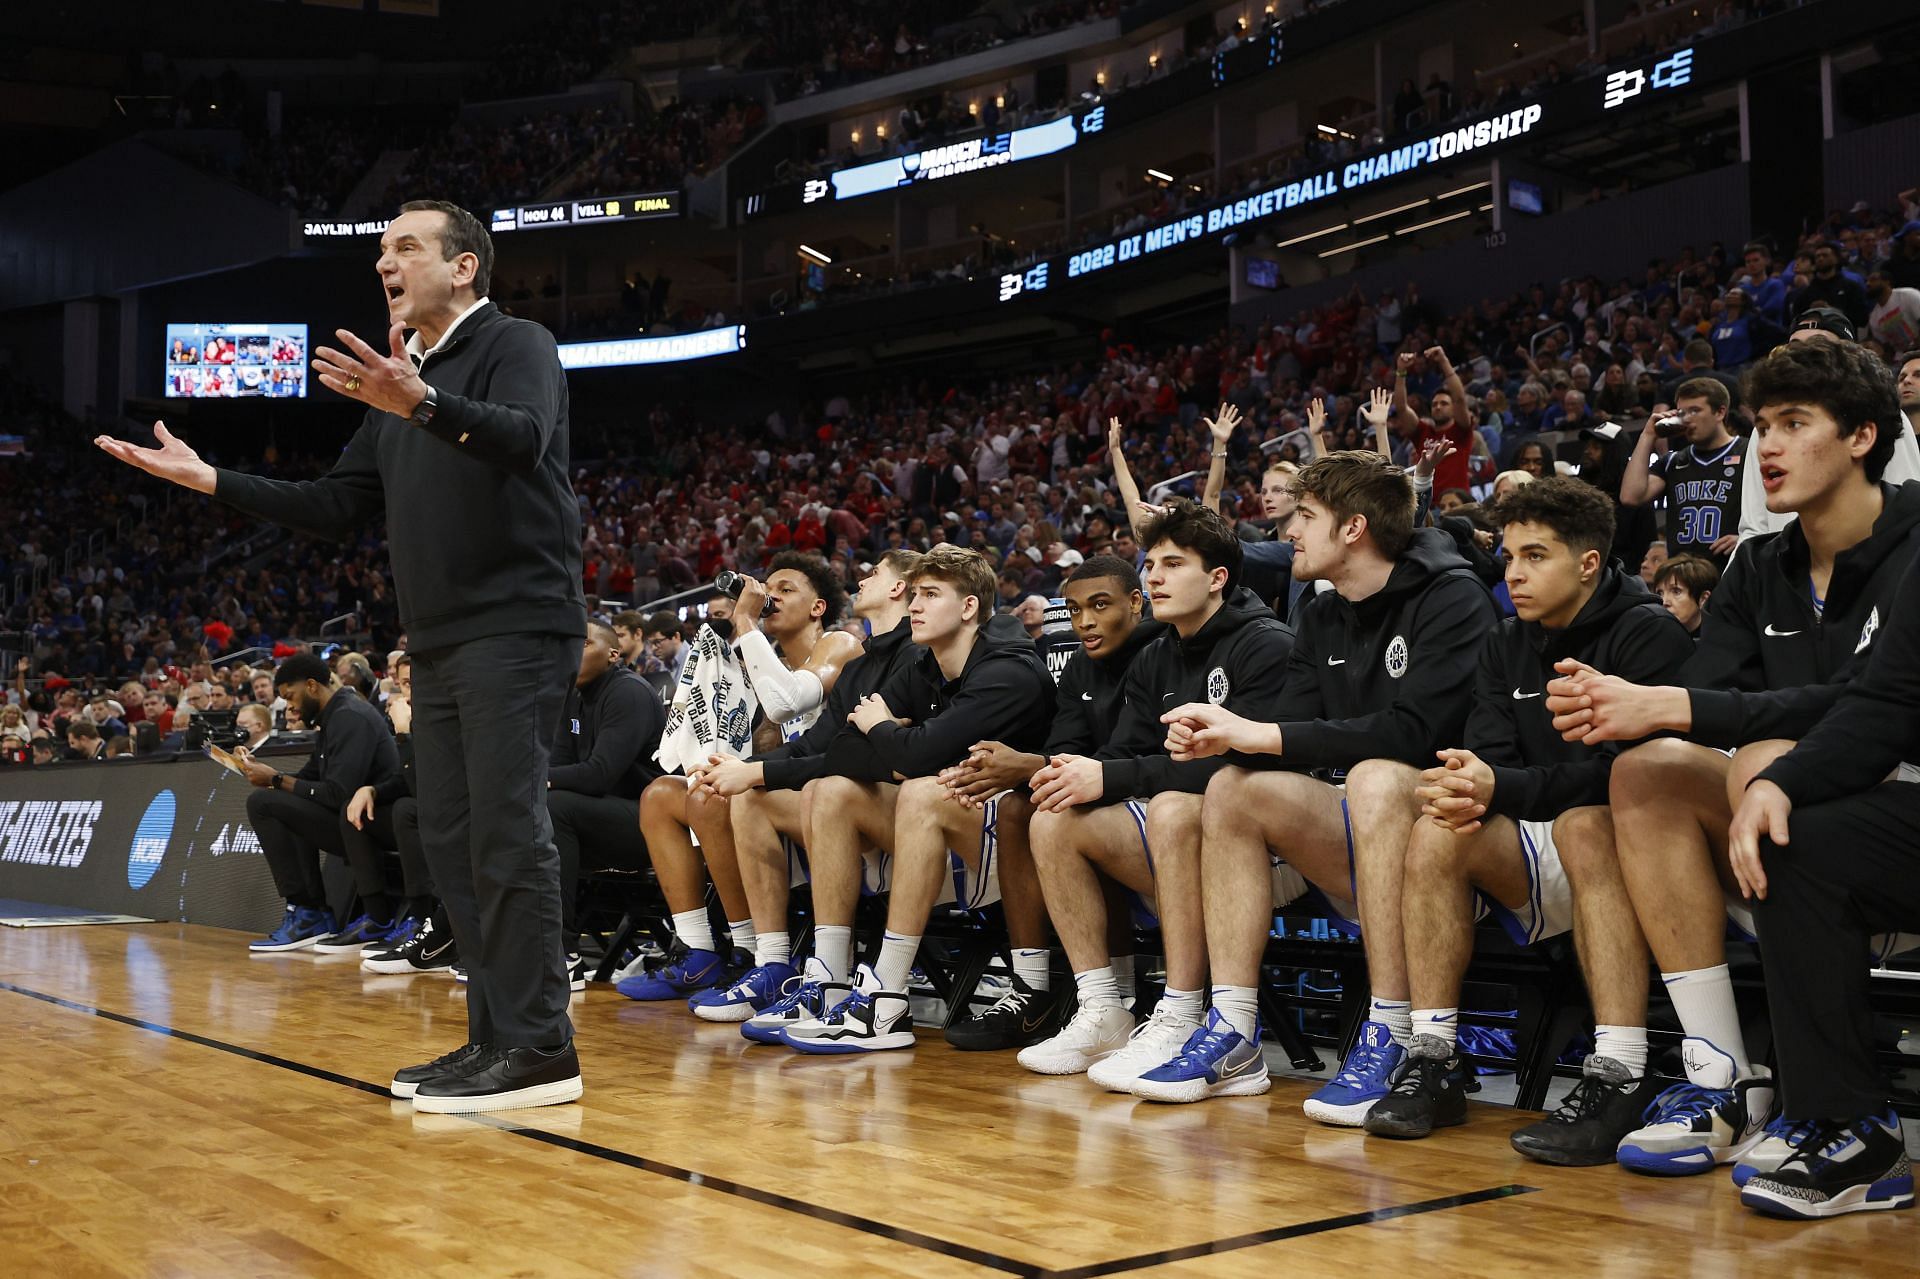 Coach K&#039;s win over Arkansas cements him as a GOAT of college basketball.